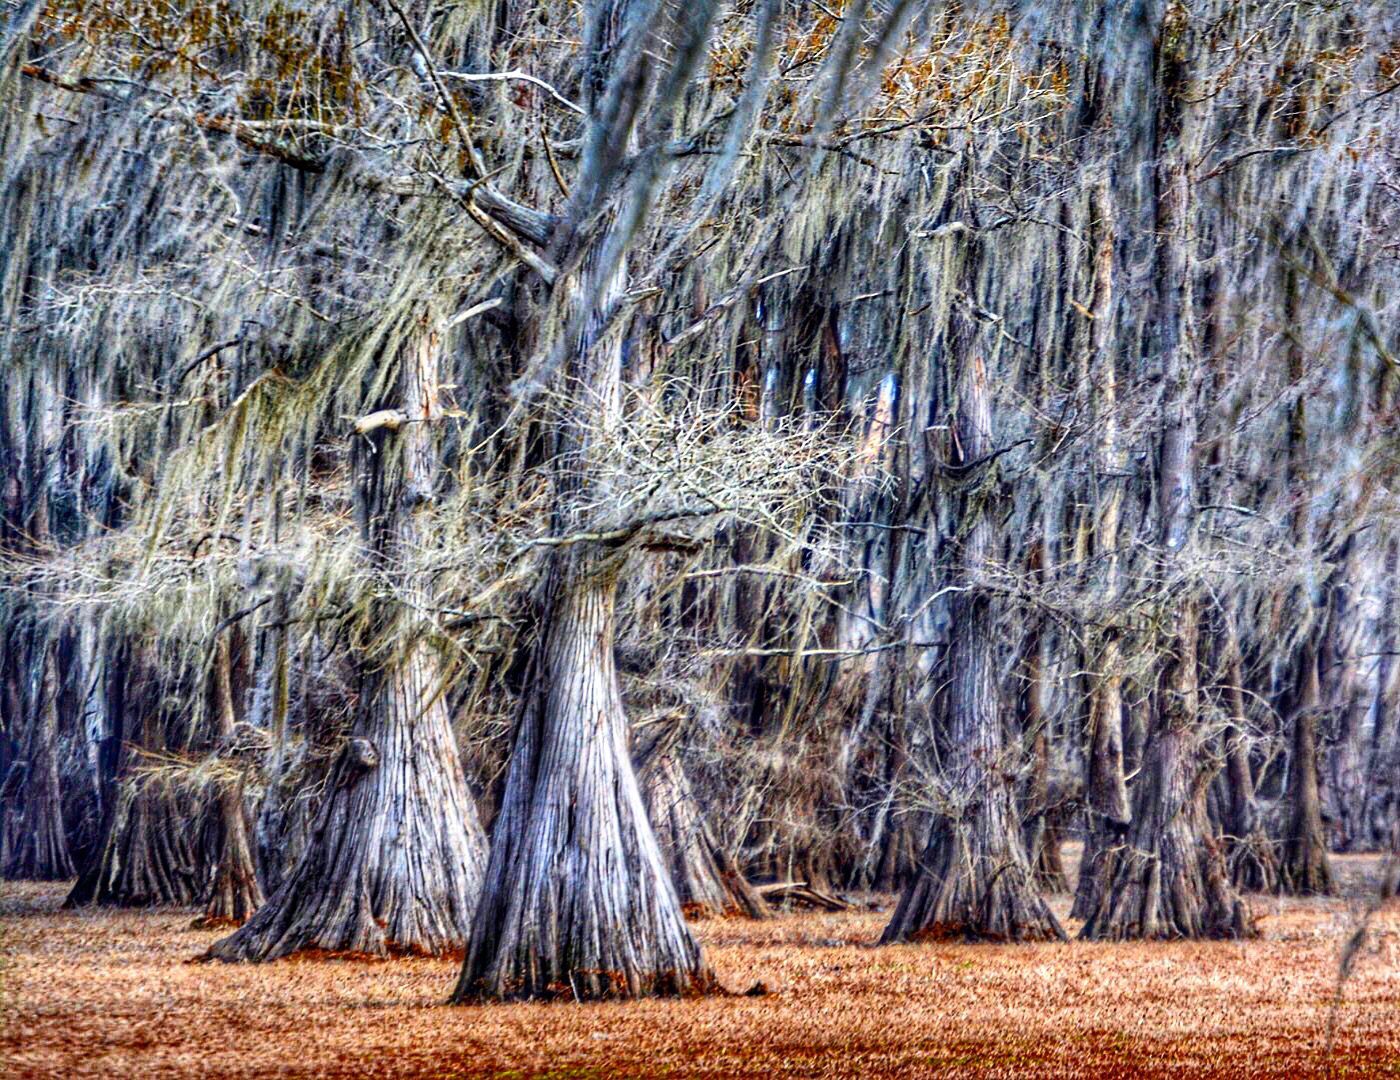 Uncertain Revisited: A Tour of Caddo Lake